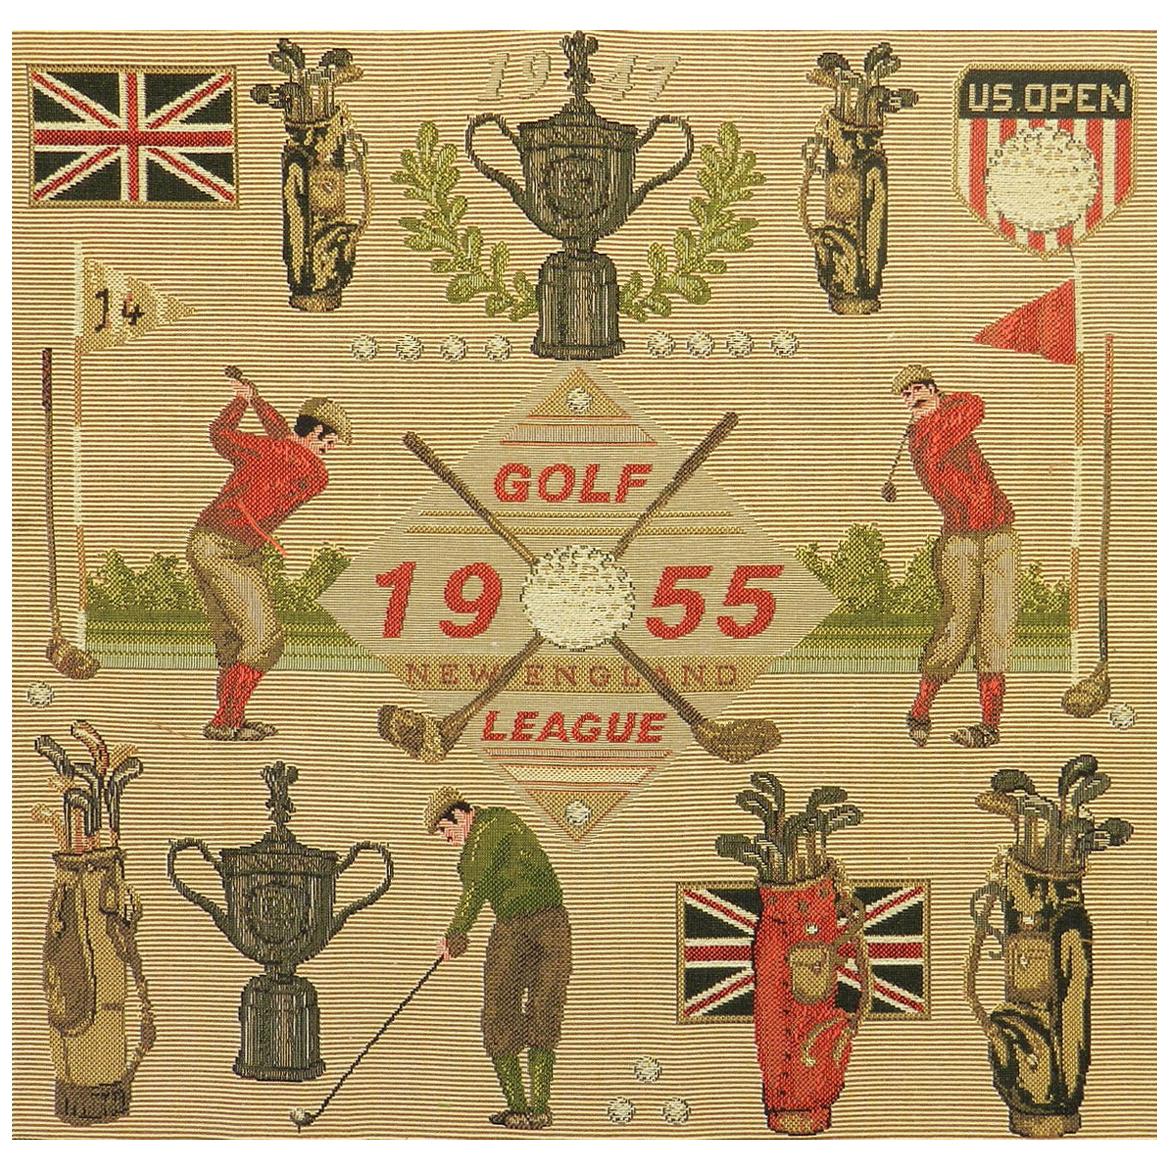 Midcentury Golf US Open Commemorative Picture Tapestry New England League c1955